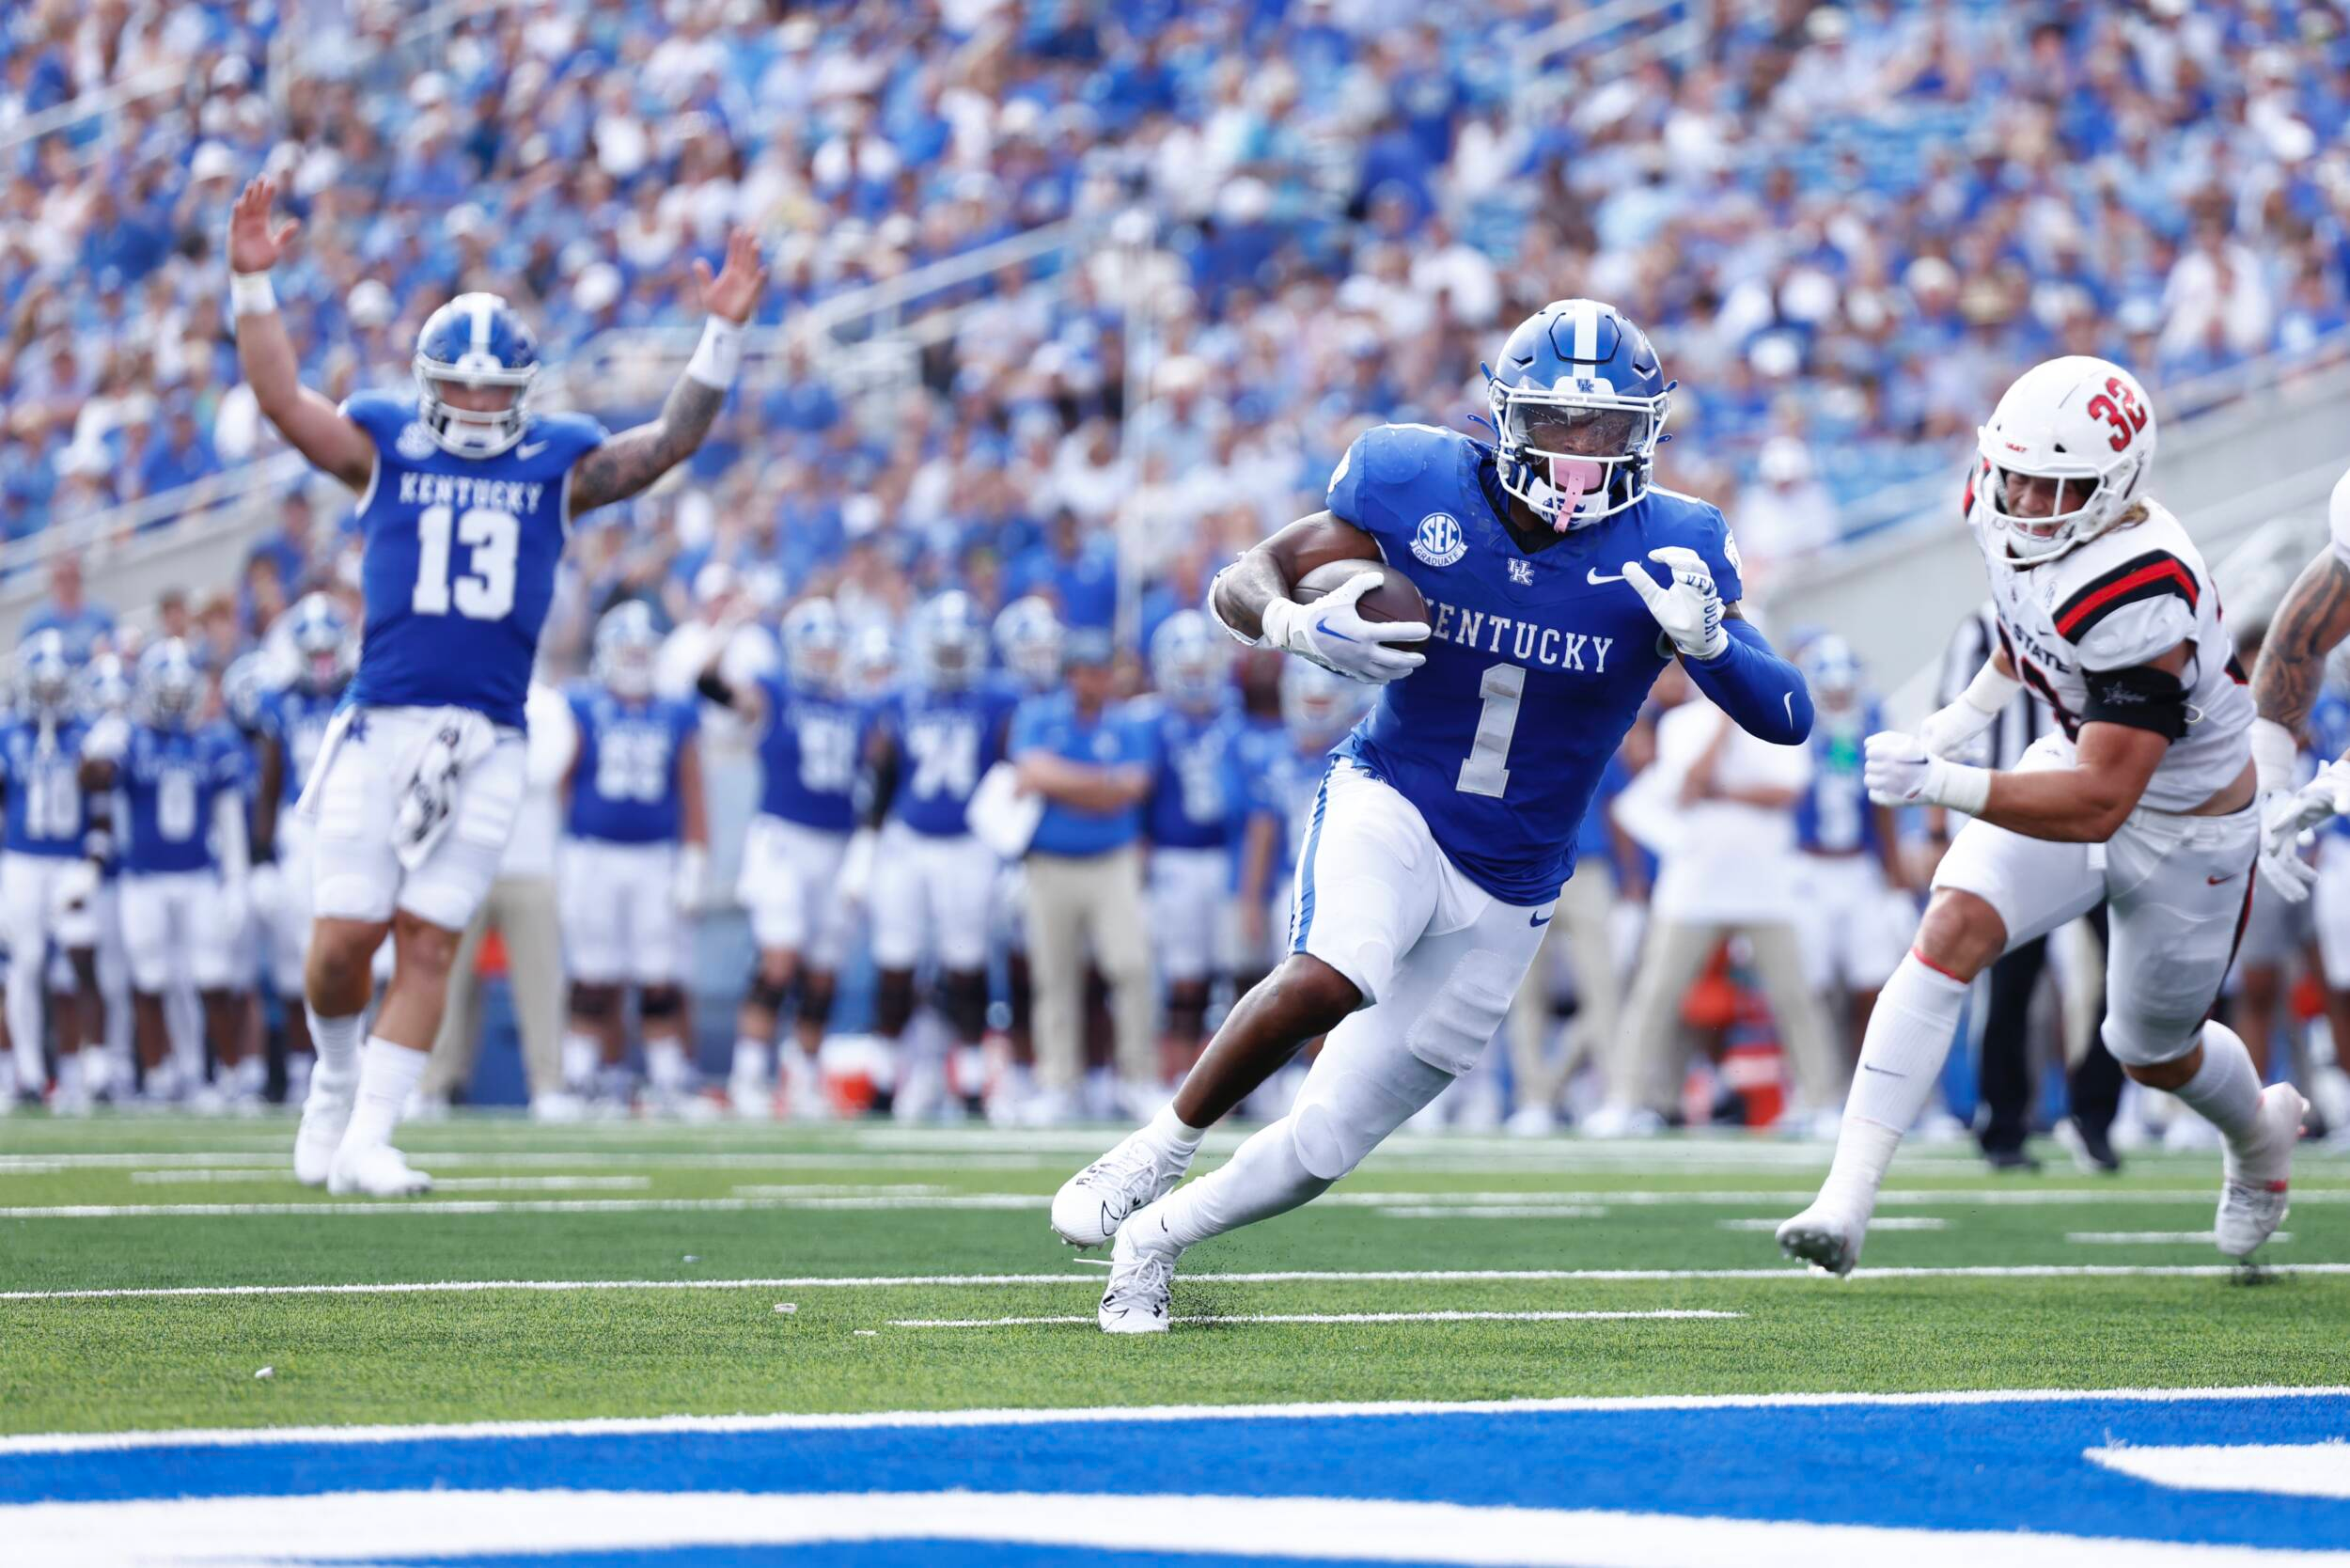 Game Day Central: Kentucky vs. Ball State